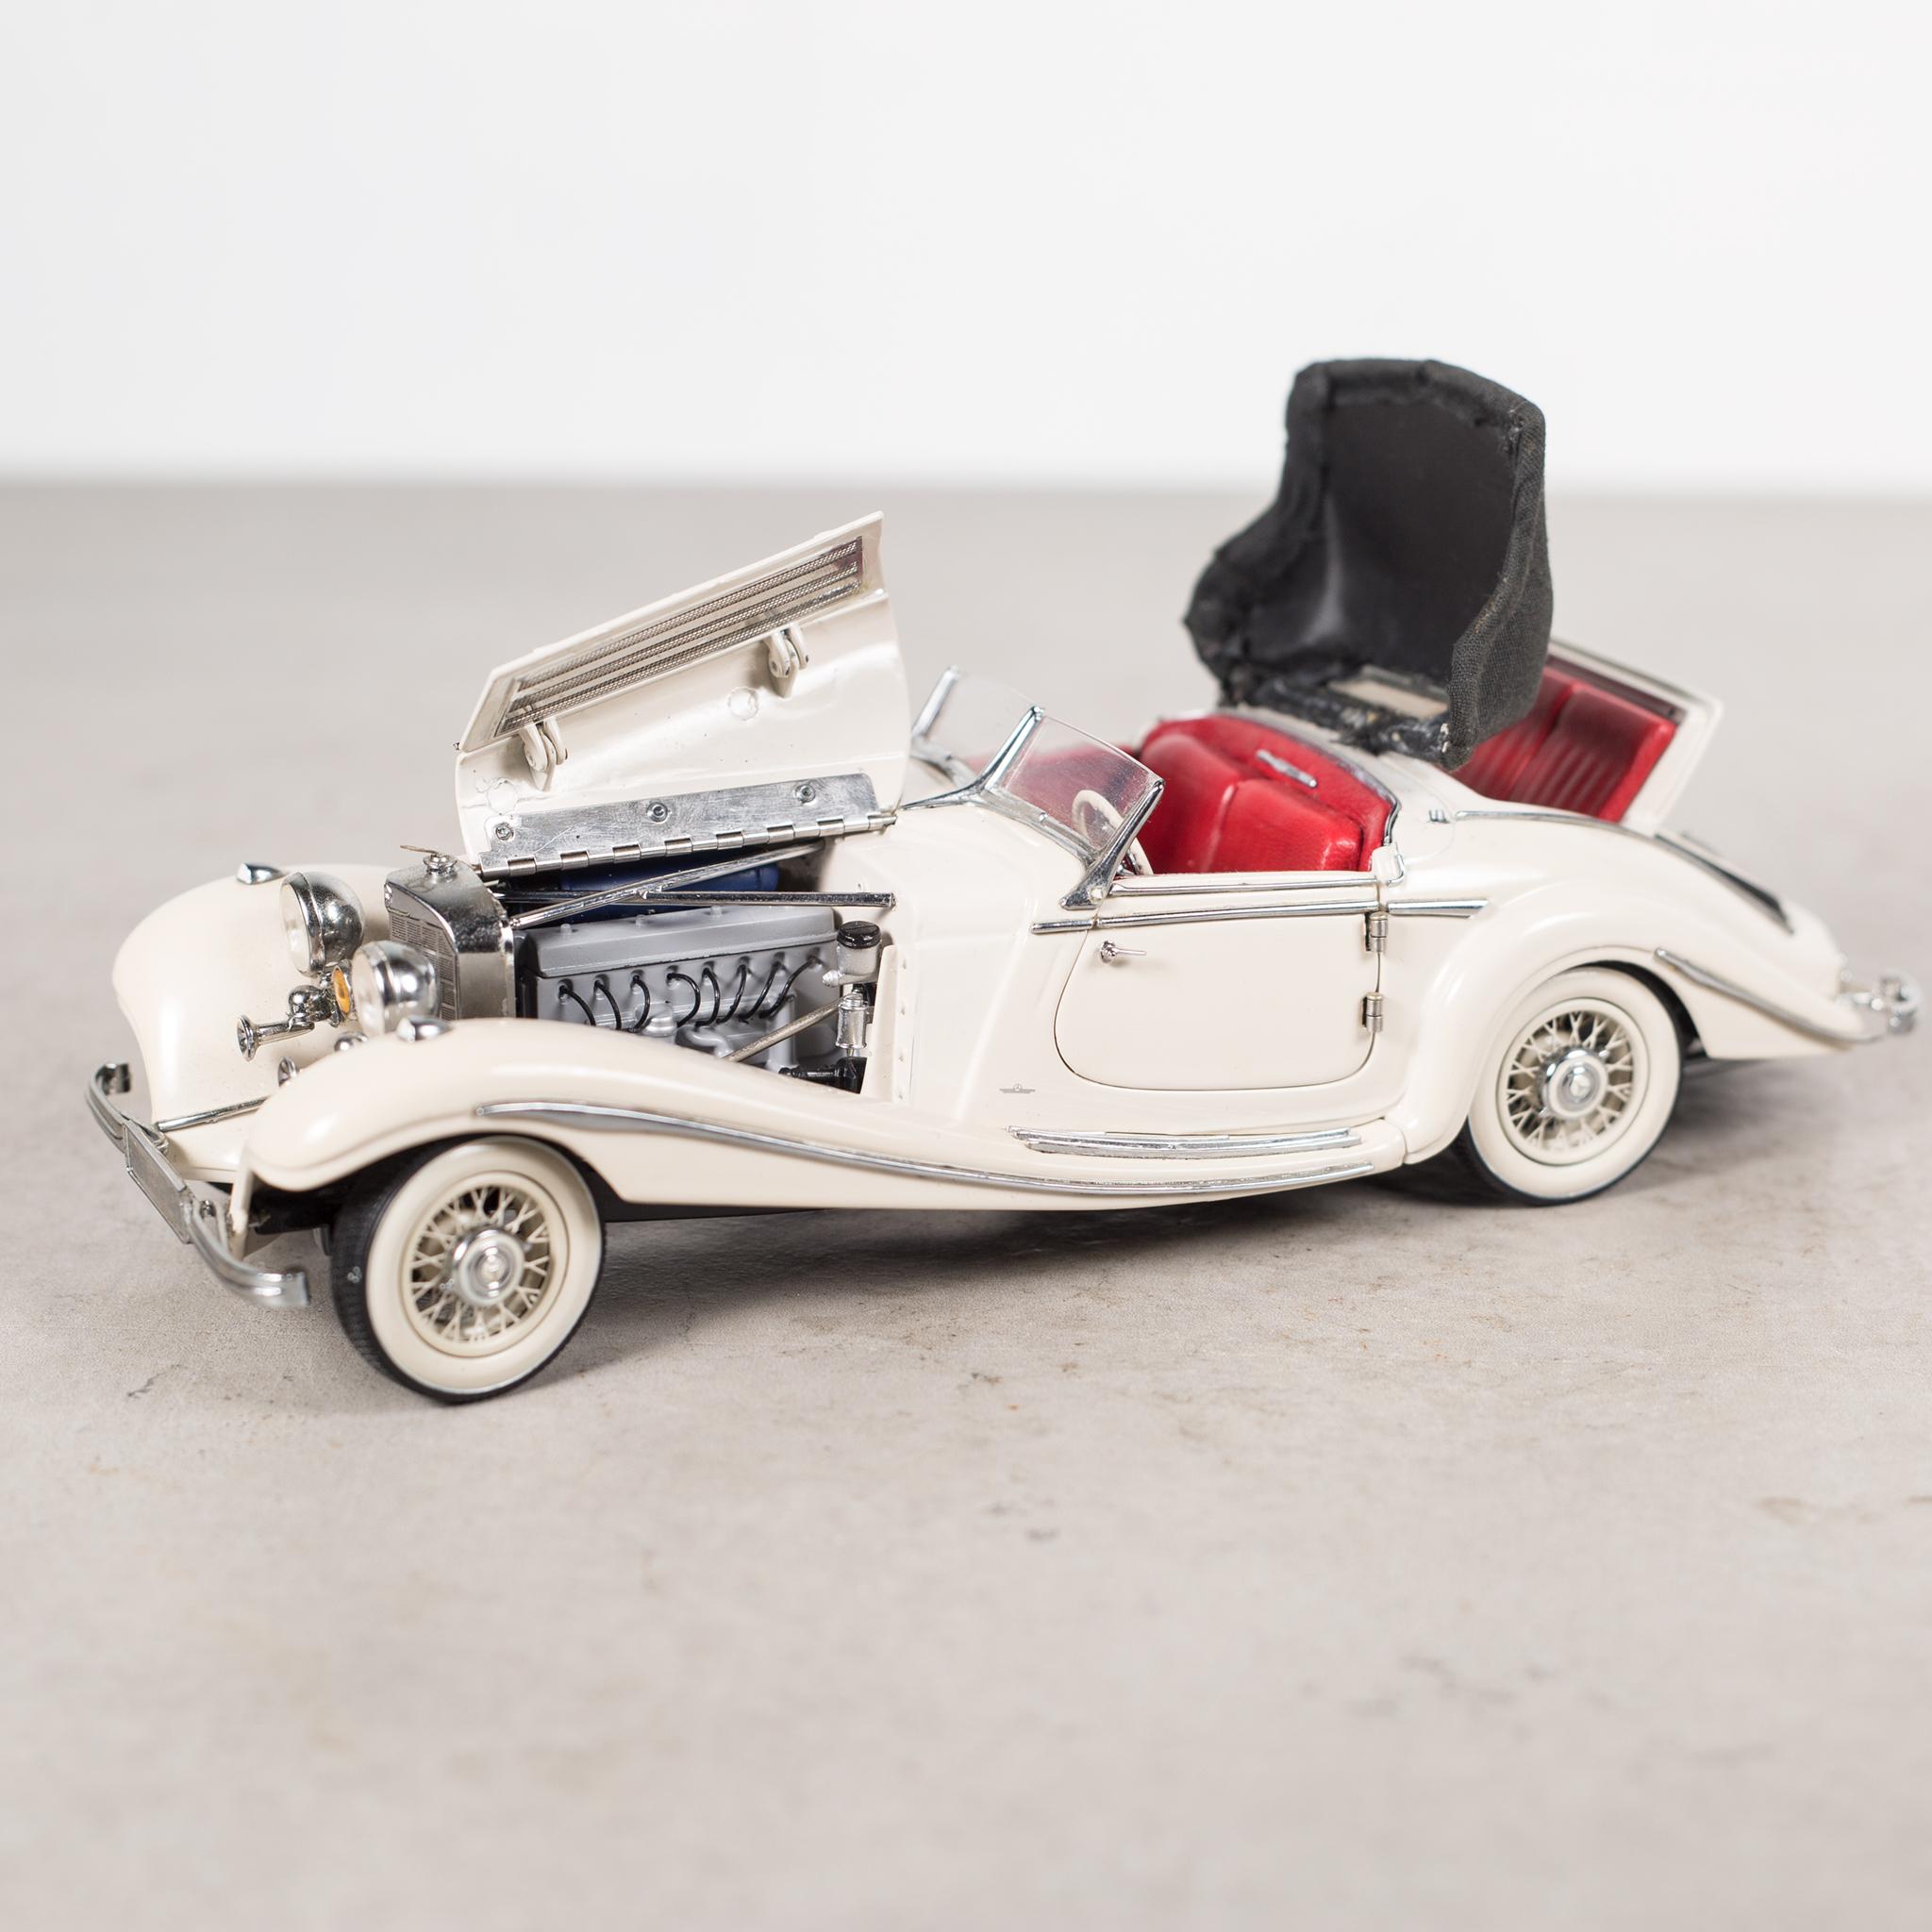 About

An exact replica of a 1930s Mercedes Benz 500 K Spezialroadster created by CMC of Germany. This diecast model is 1/24 scale with red leather interior, retractable roof, working hoods, doors and rumble seat. The rubber wheels turn with the